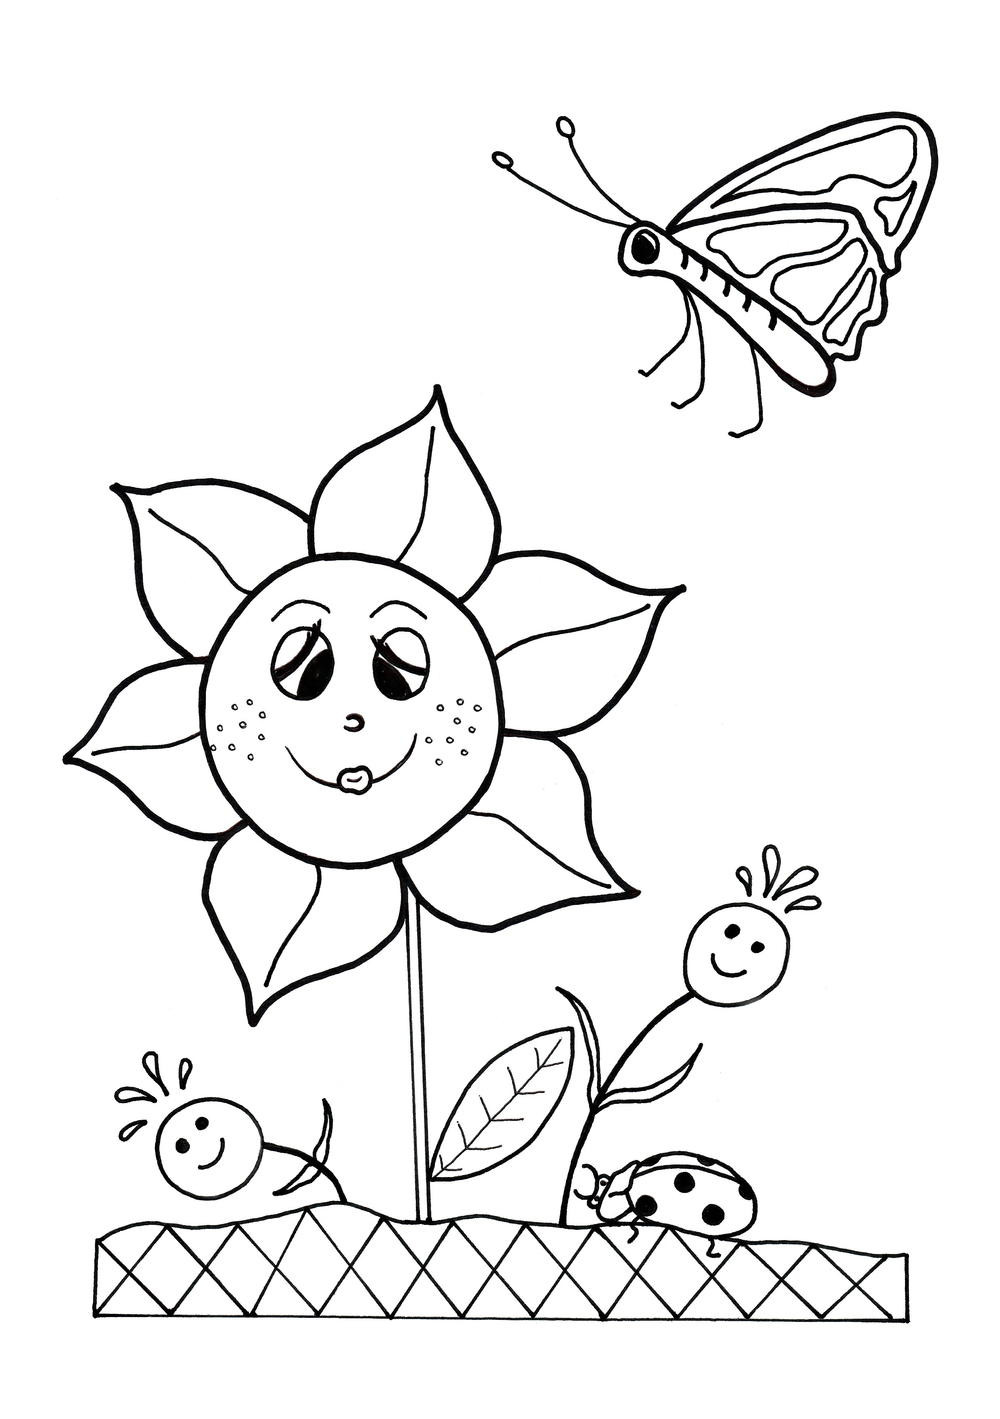 Flower Coloring Pages For Girls
 Dancing Flowers Spring Coloring Sheet